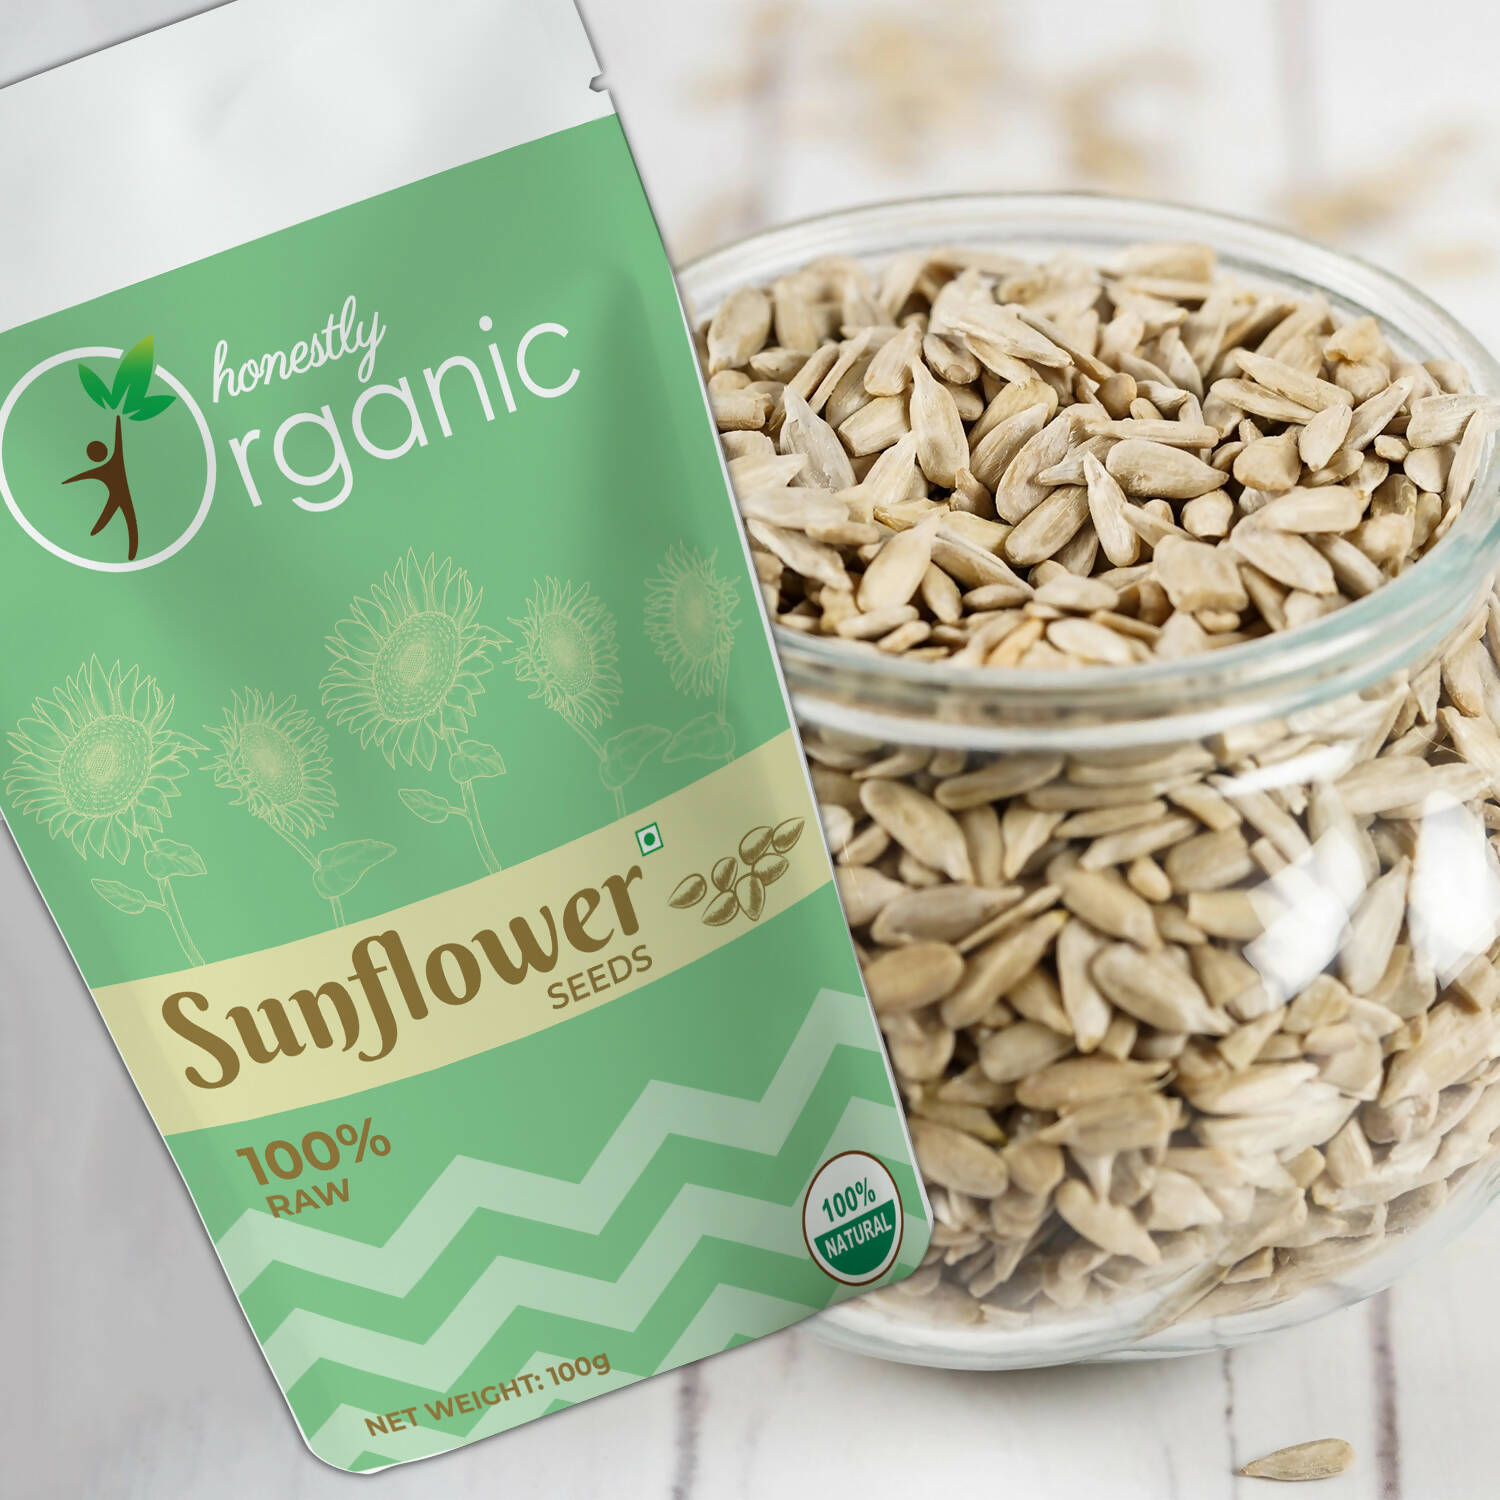 Honestly Organic Sunflower Seeds - 100g (Pack of 2) Wemy Store